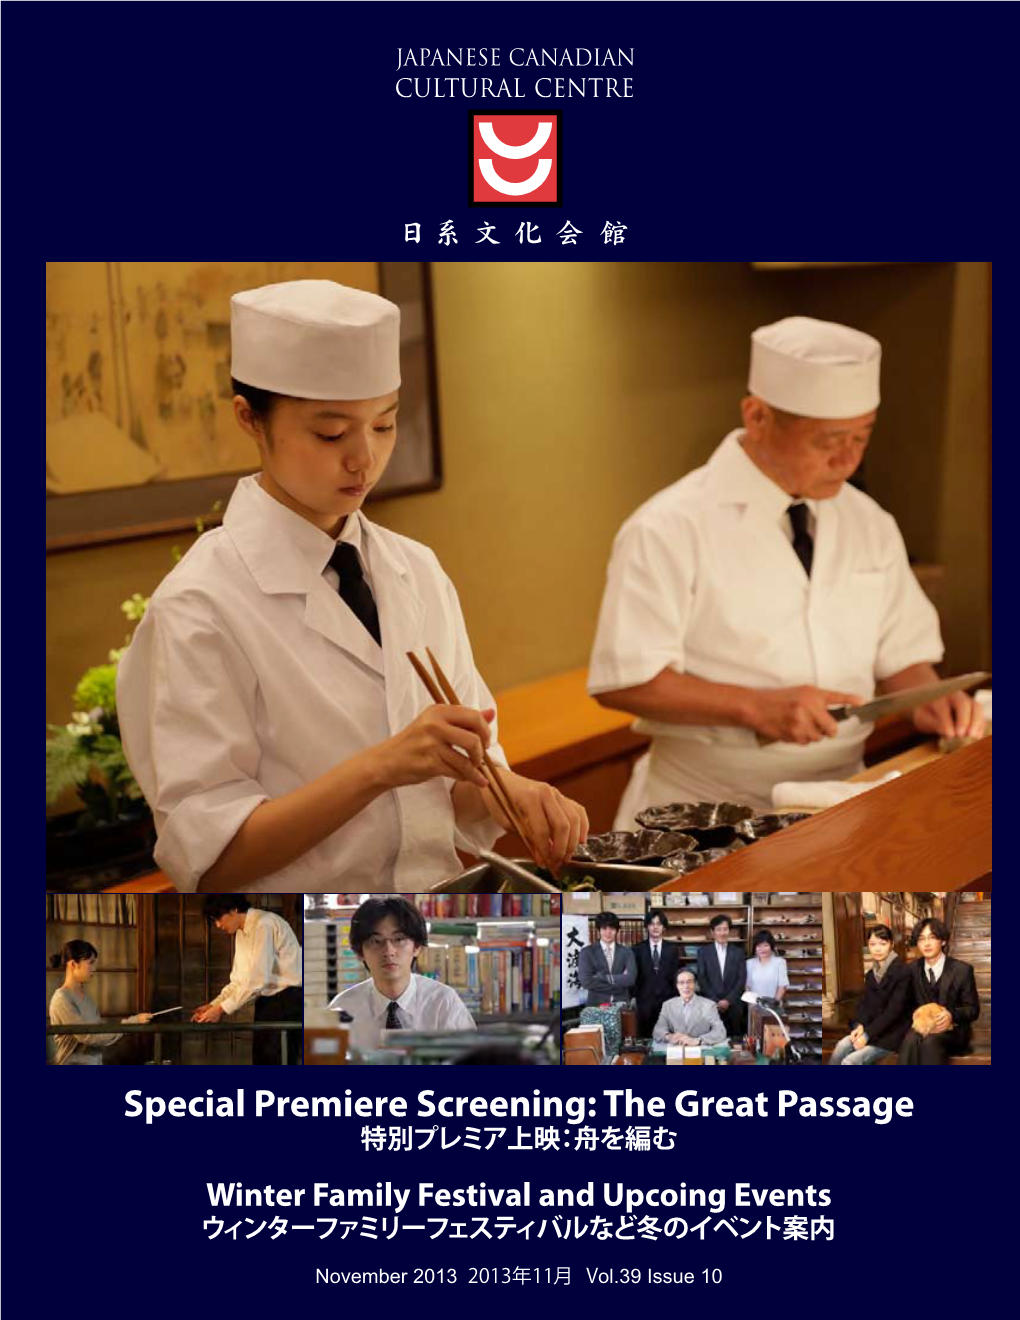 Special Premiere Screening: the Great Passage 特別プレミア上映：舟を編む Winter Family Festival and Upcoing Events ウィンターファミリーフェスティバルなど冬のイベント案内